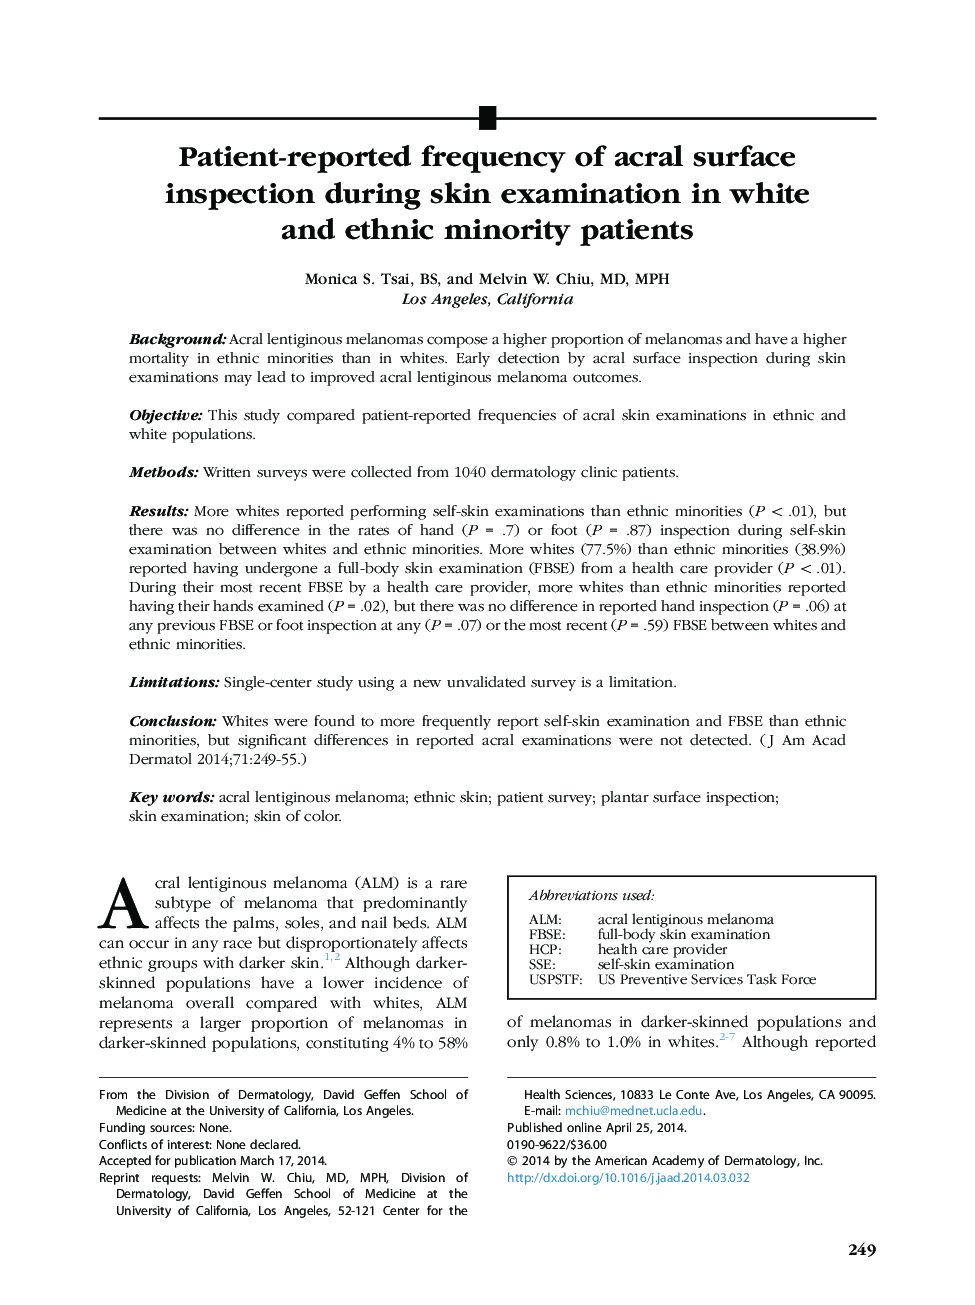 Original articlePatient-reported frequency of acral surface inspectionÂ during skin examination in white andÂ ethnic minority patients